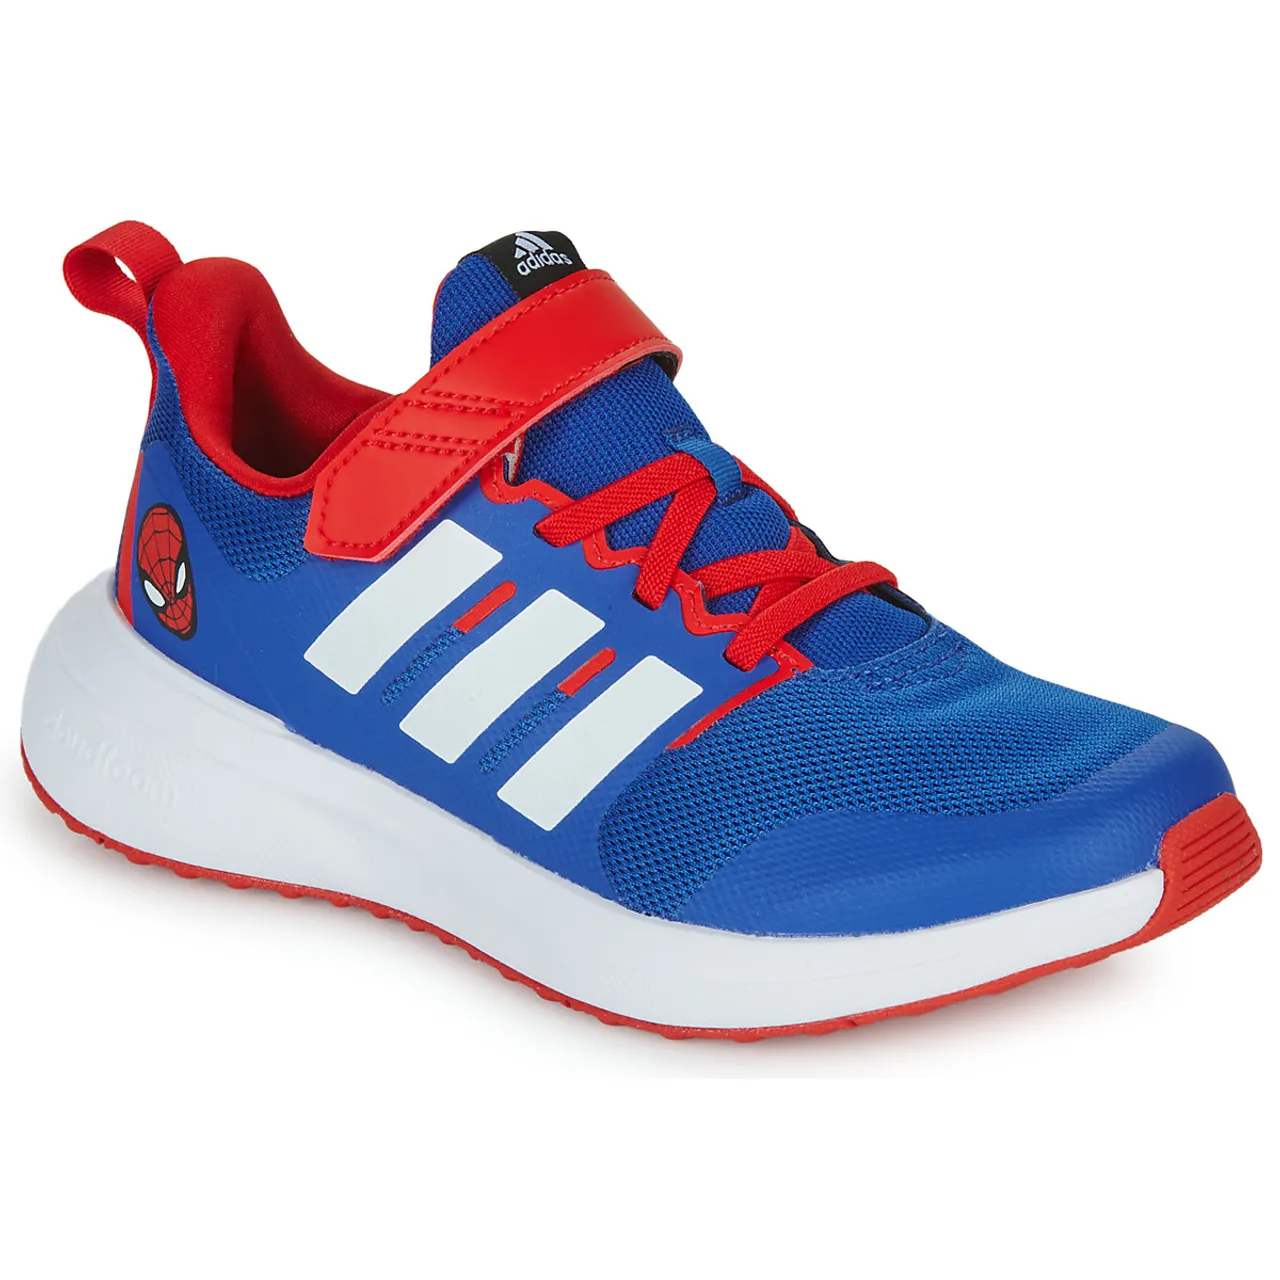 adidas  FortaRun 2.0 SPIDER  boys's Children's Shoes (Trainers) in Blue